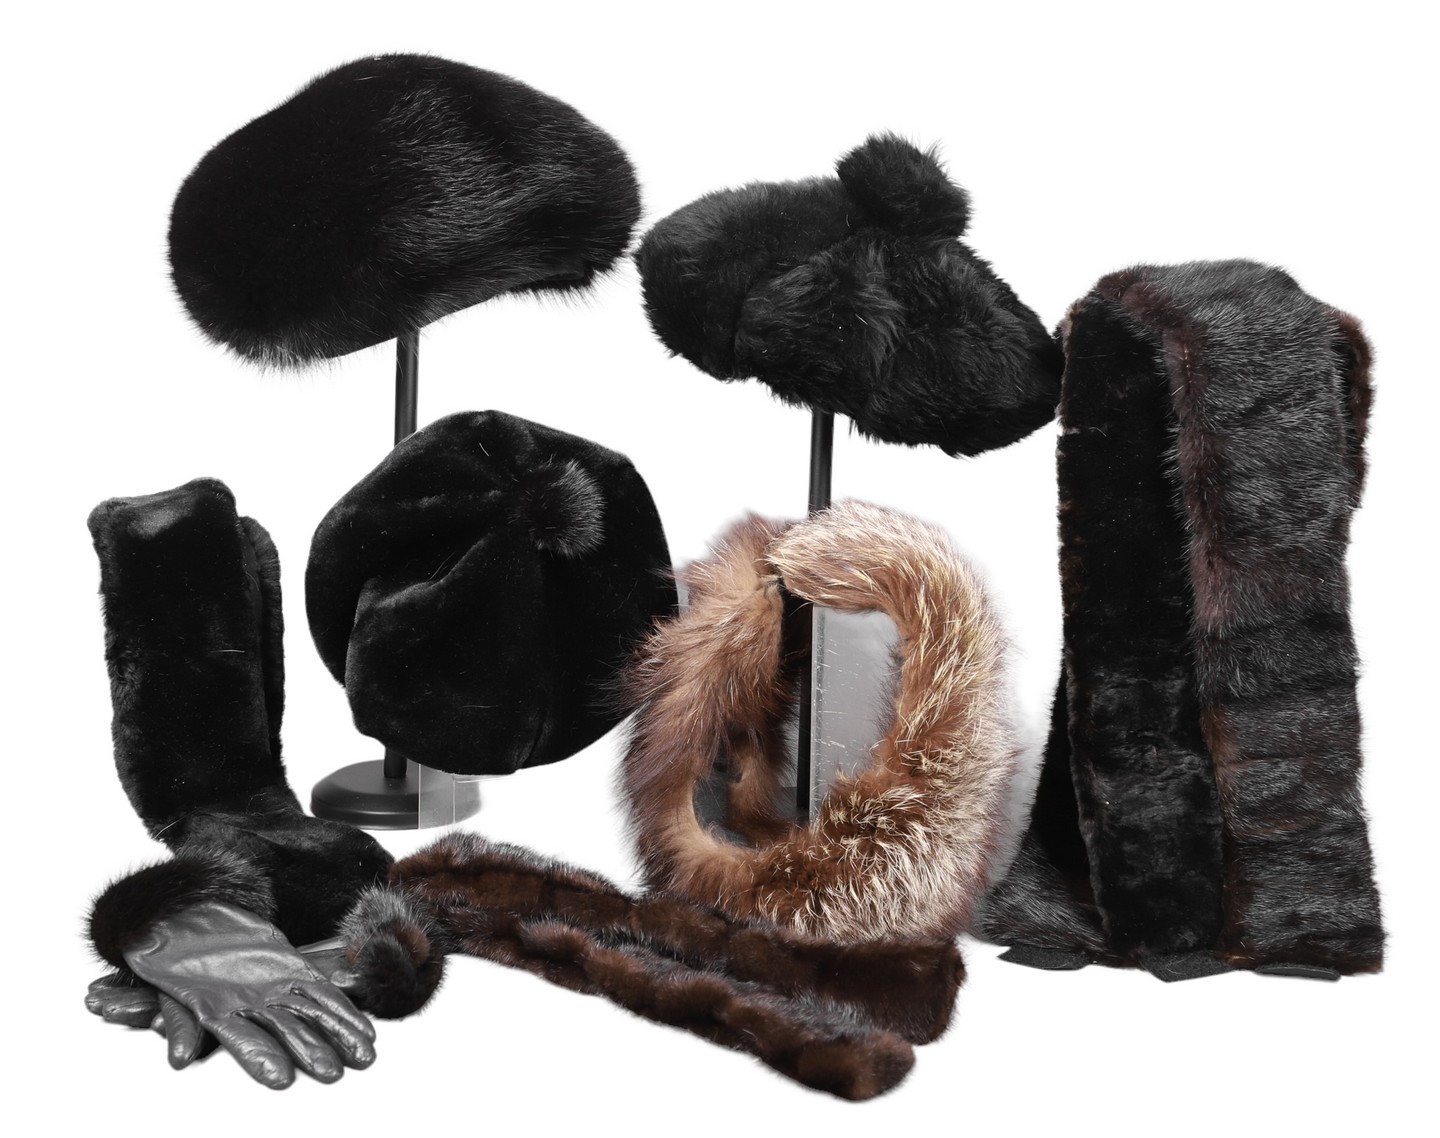  9 Fur hats and collars to include 27a6a7